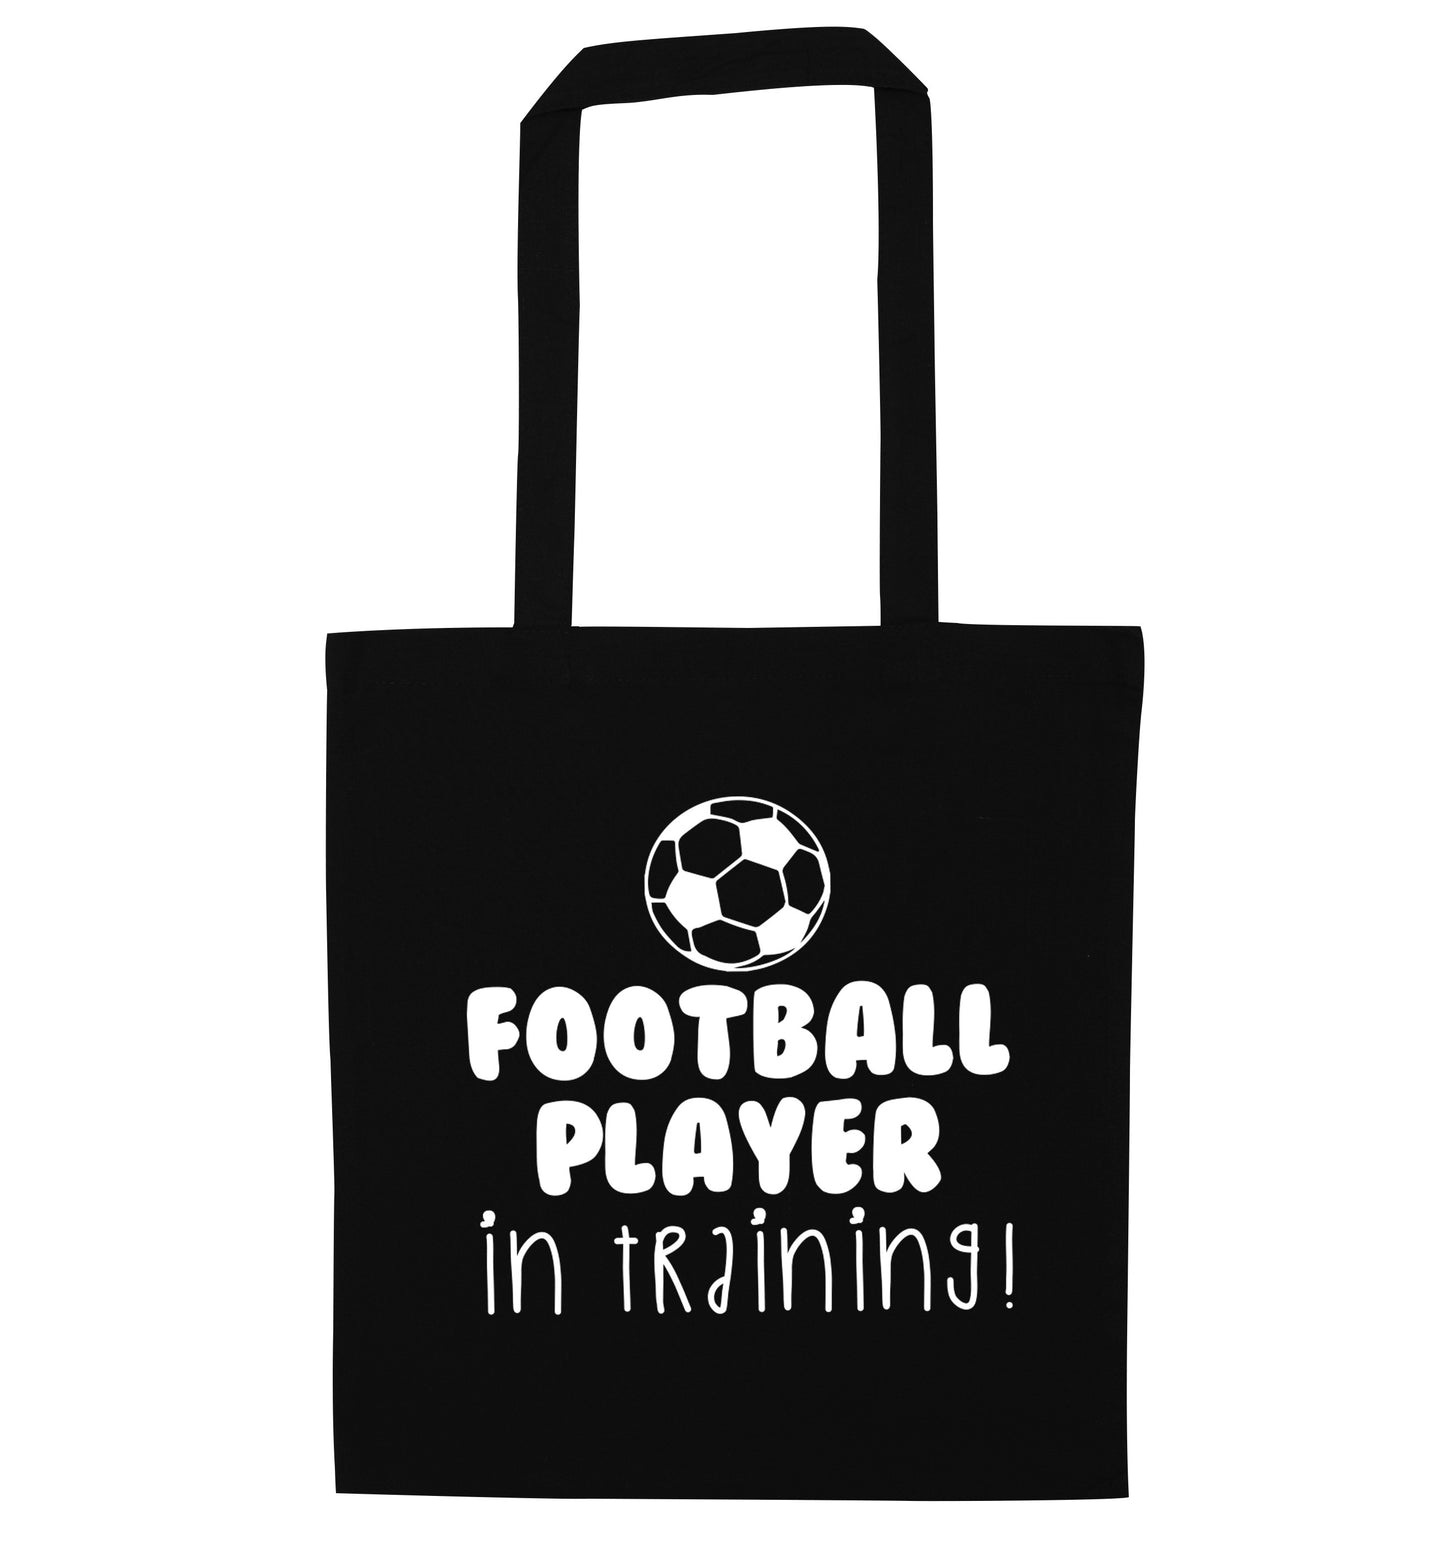 Football player in training black tote bag